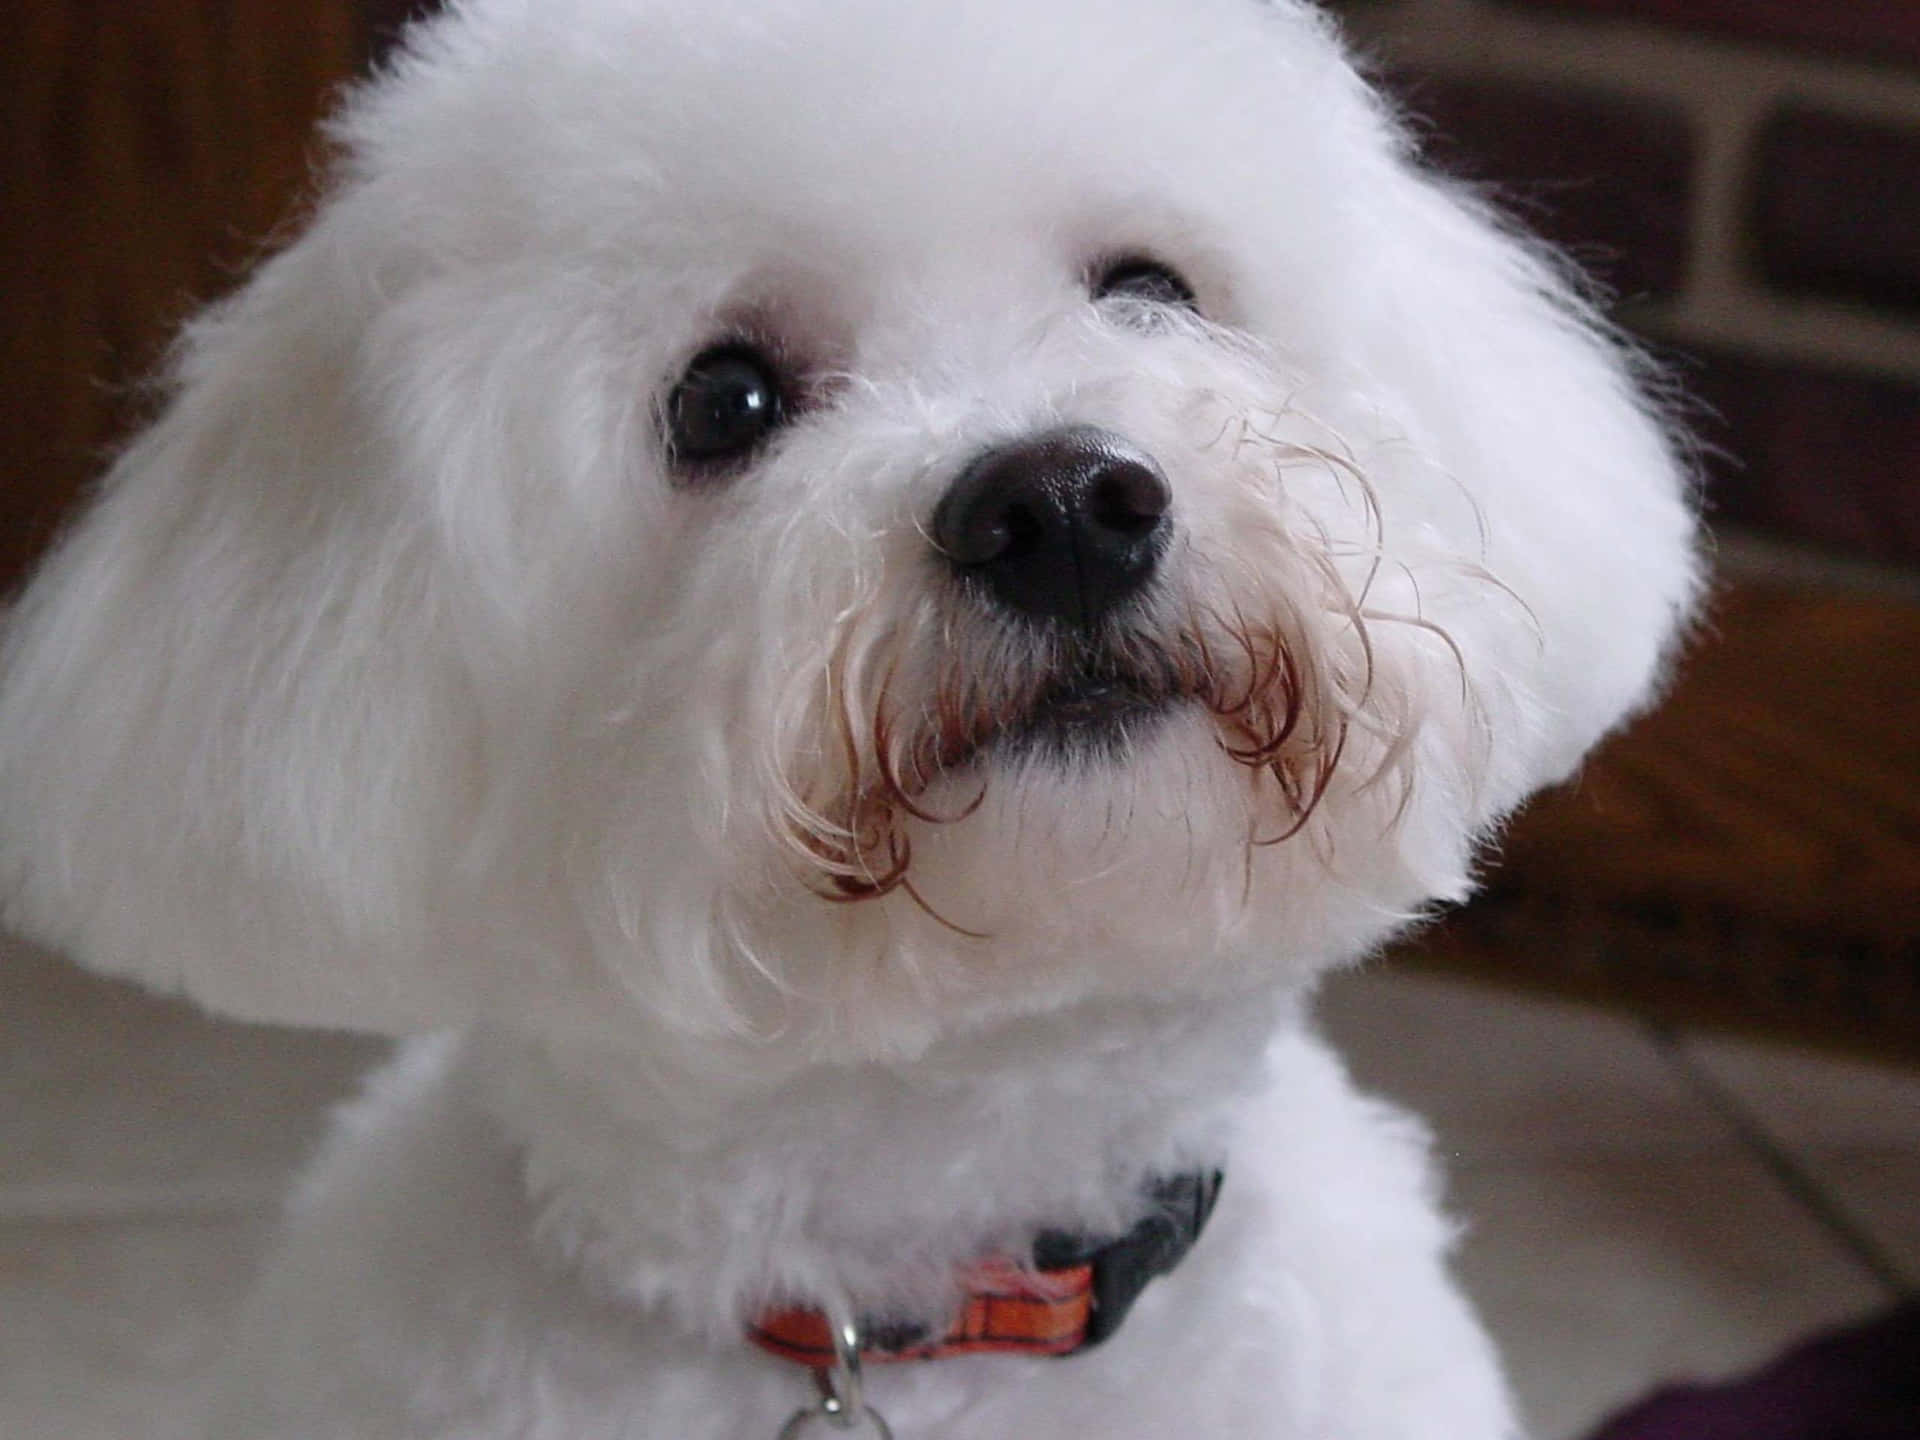 A Bichon Frise smiles up at the camera, ready to steal your heart.